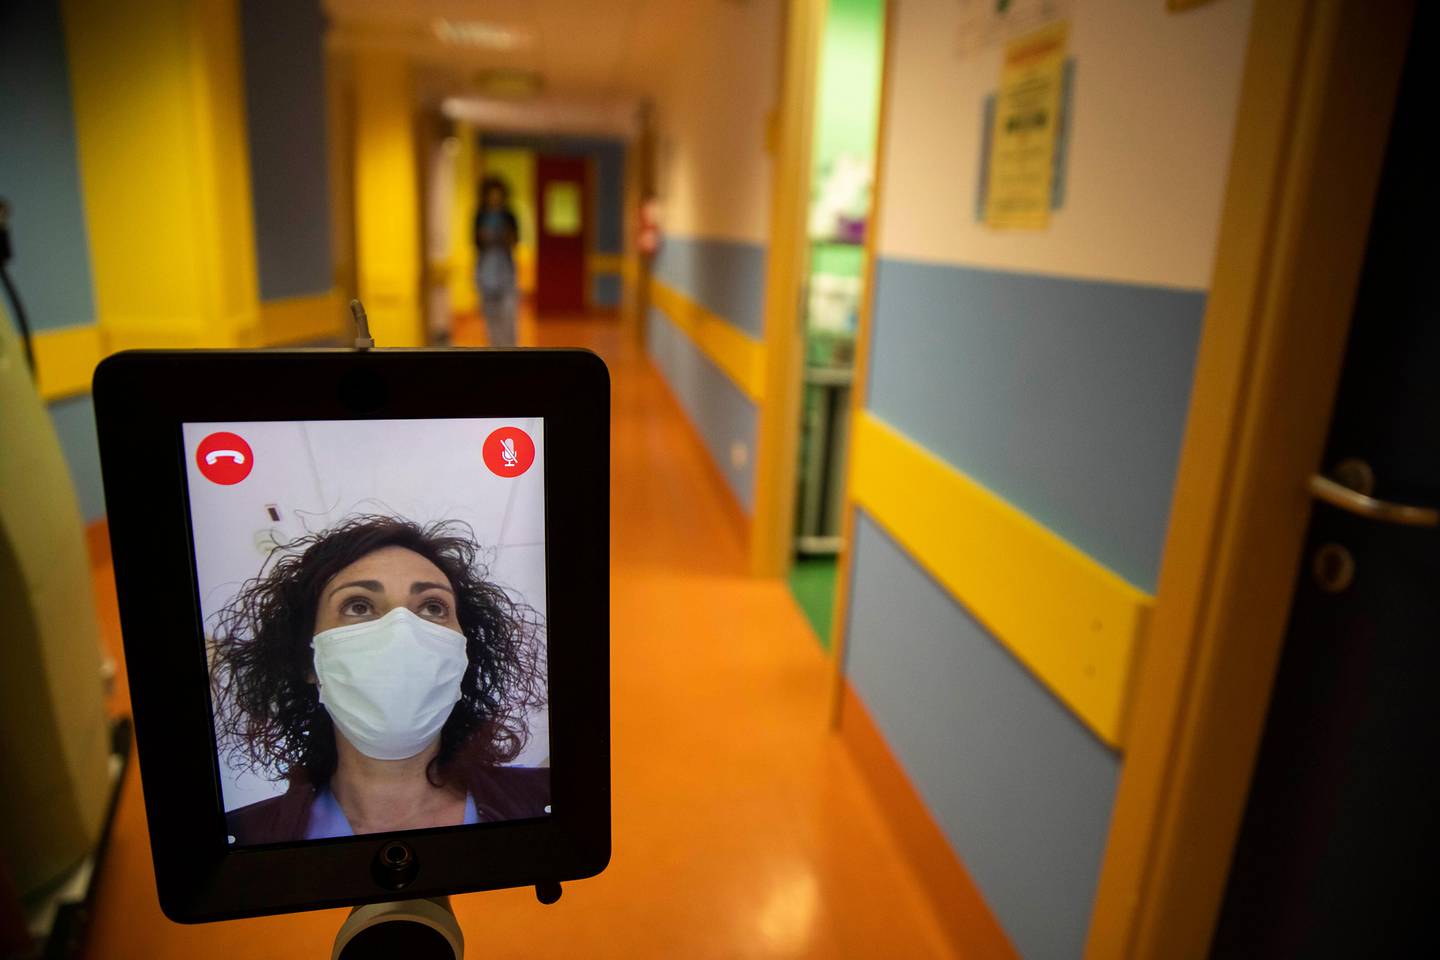 Nurse Helga drives 'Ivo' a tablet supported by a periscopic pole mounted on wheels at 'Ospedale di Circolo' in Varese, Italy, Wednesday, April 8, 2020. Ivo is remotely controlled by the healthcare professional via smartphone. It can enter the rooms and, with a video call system, put the staff in communication with the patients. The new coronavirus causes mild or moderate symptoms for most people, but for some, especially older adults and people with existing health problems, it can cause more severe illness or death. (AP Photo/Luca Bruno)